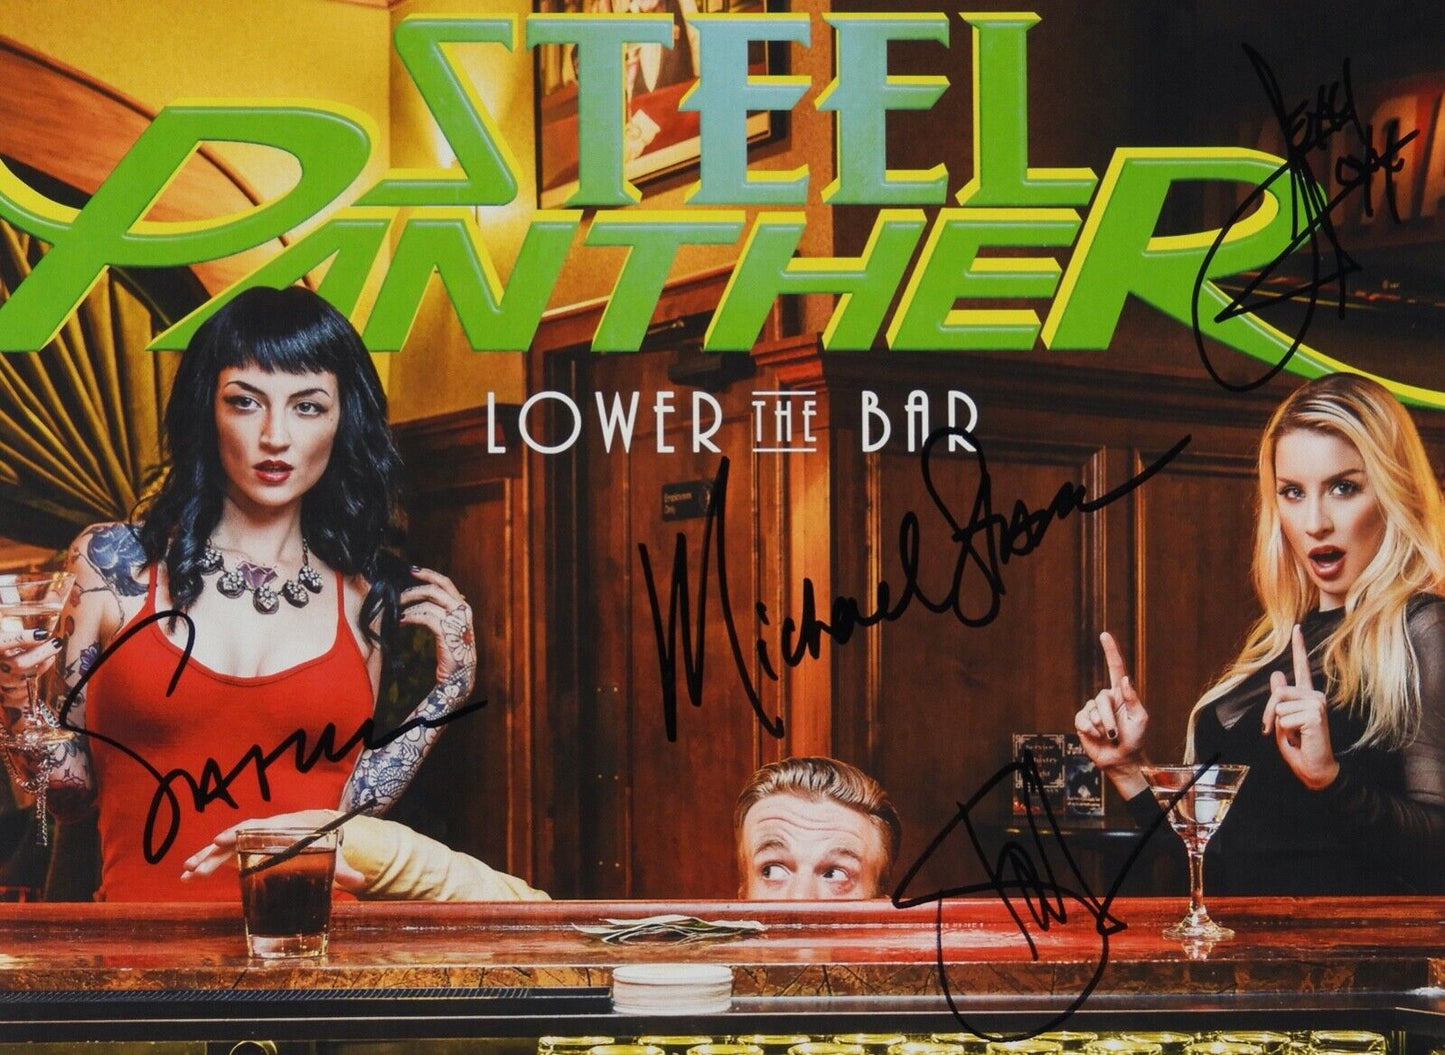 Steel Panther Fully Signed Signed JSA Autograph Album Record Vinyl Lower The Bar